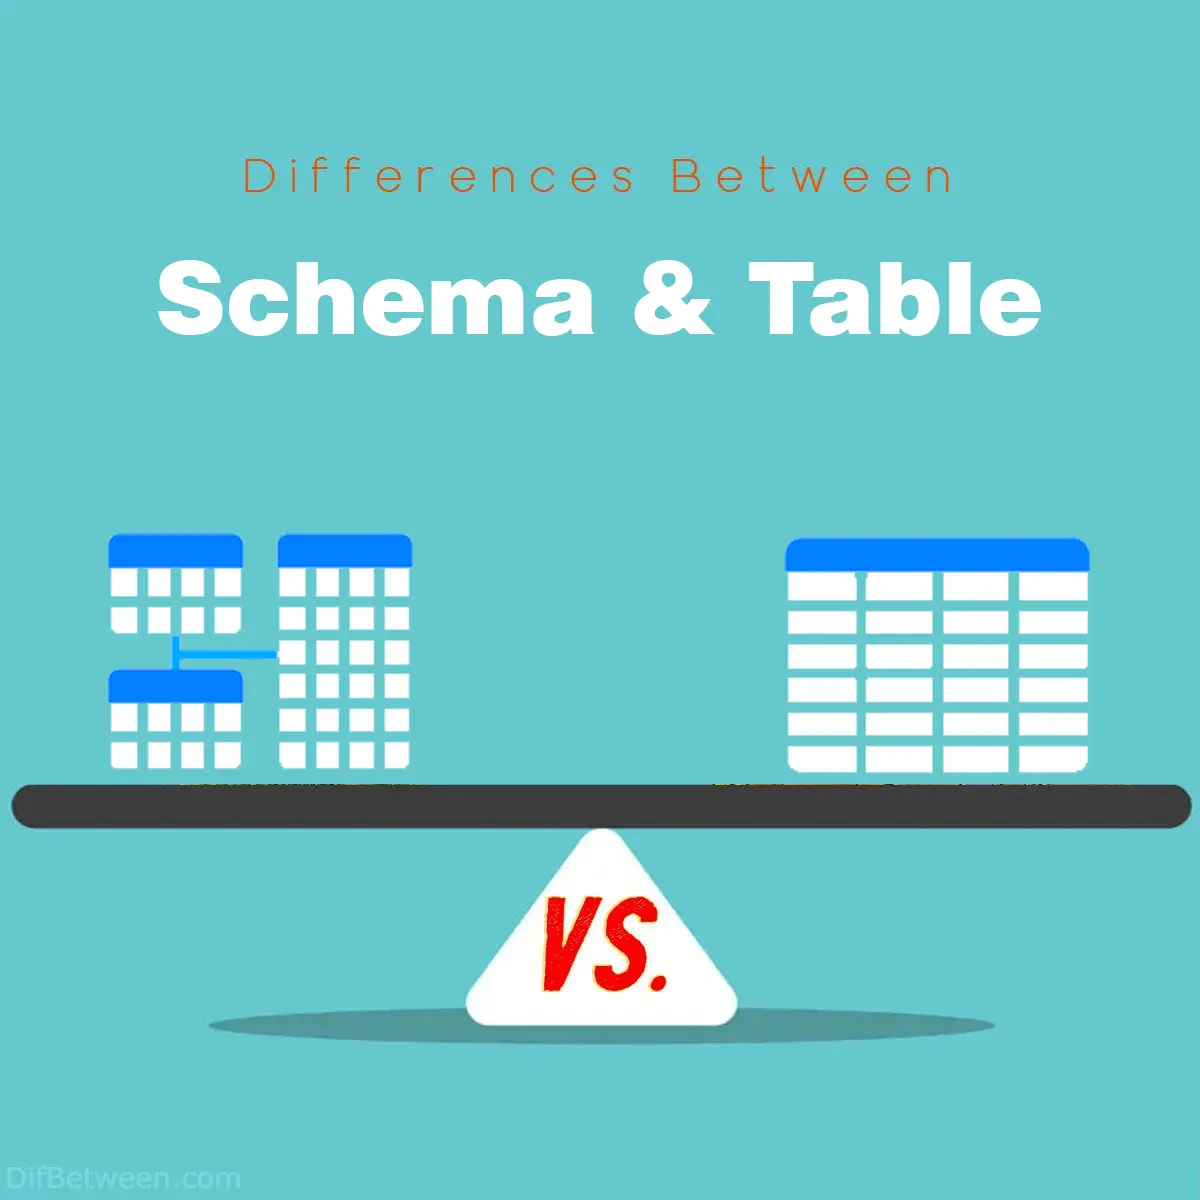 Differences Between Schema vs Table